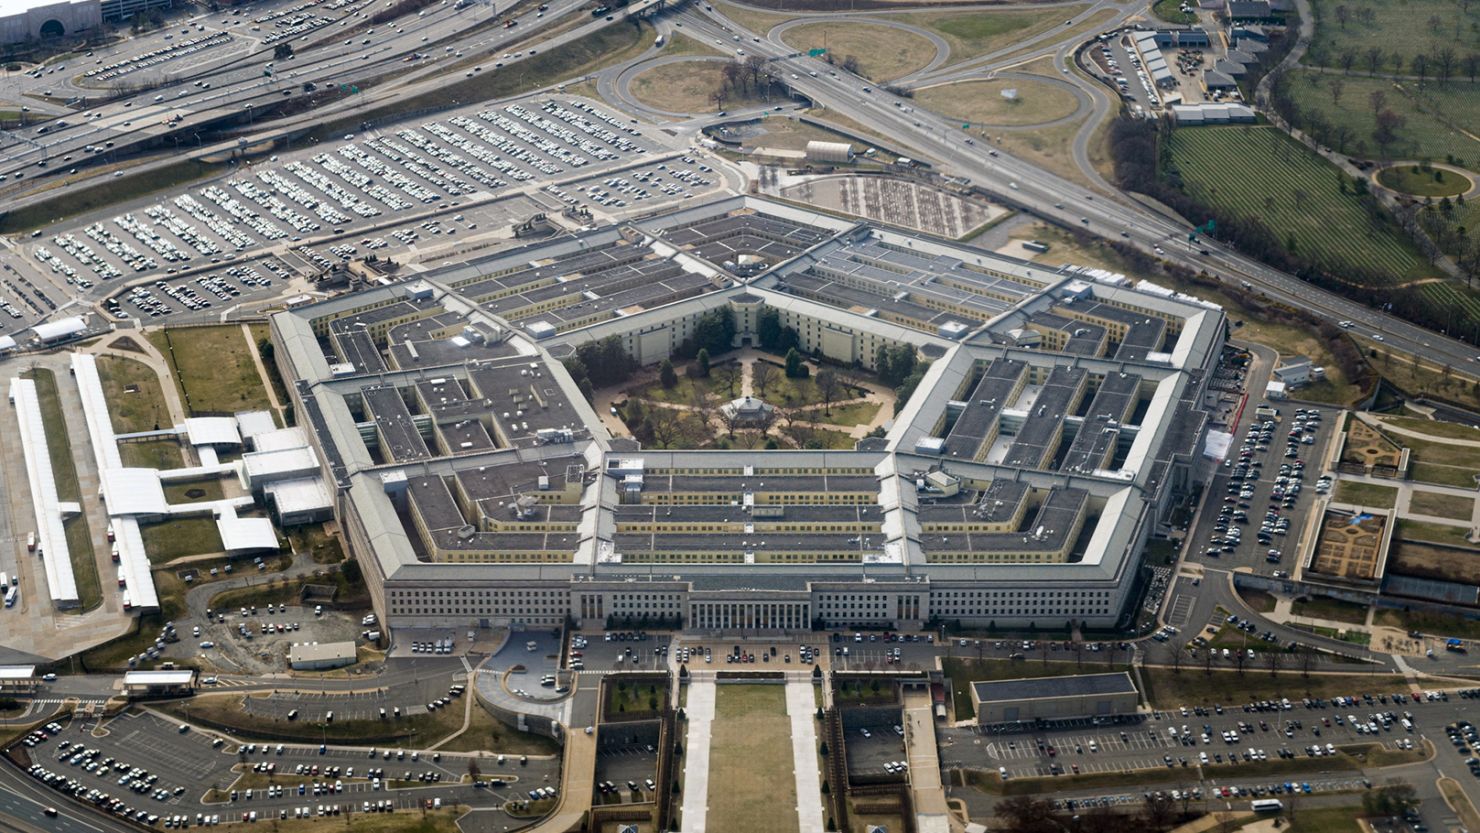 The Pentagon is seen from the air in Washington, U.S., March 3, 2022, more than a week after Russia invaded Ukraine.